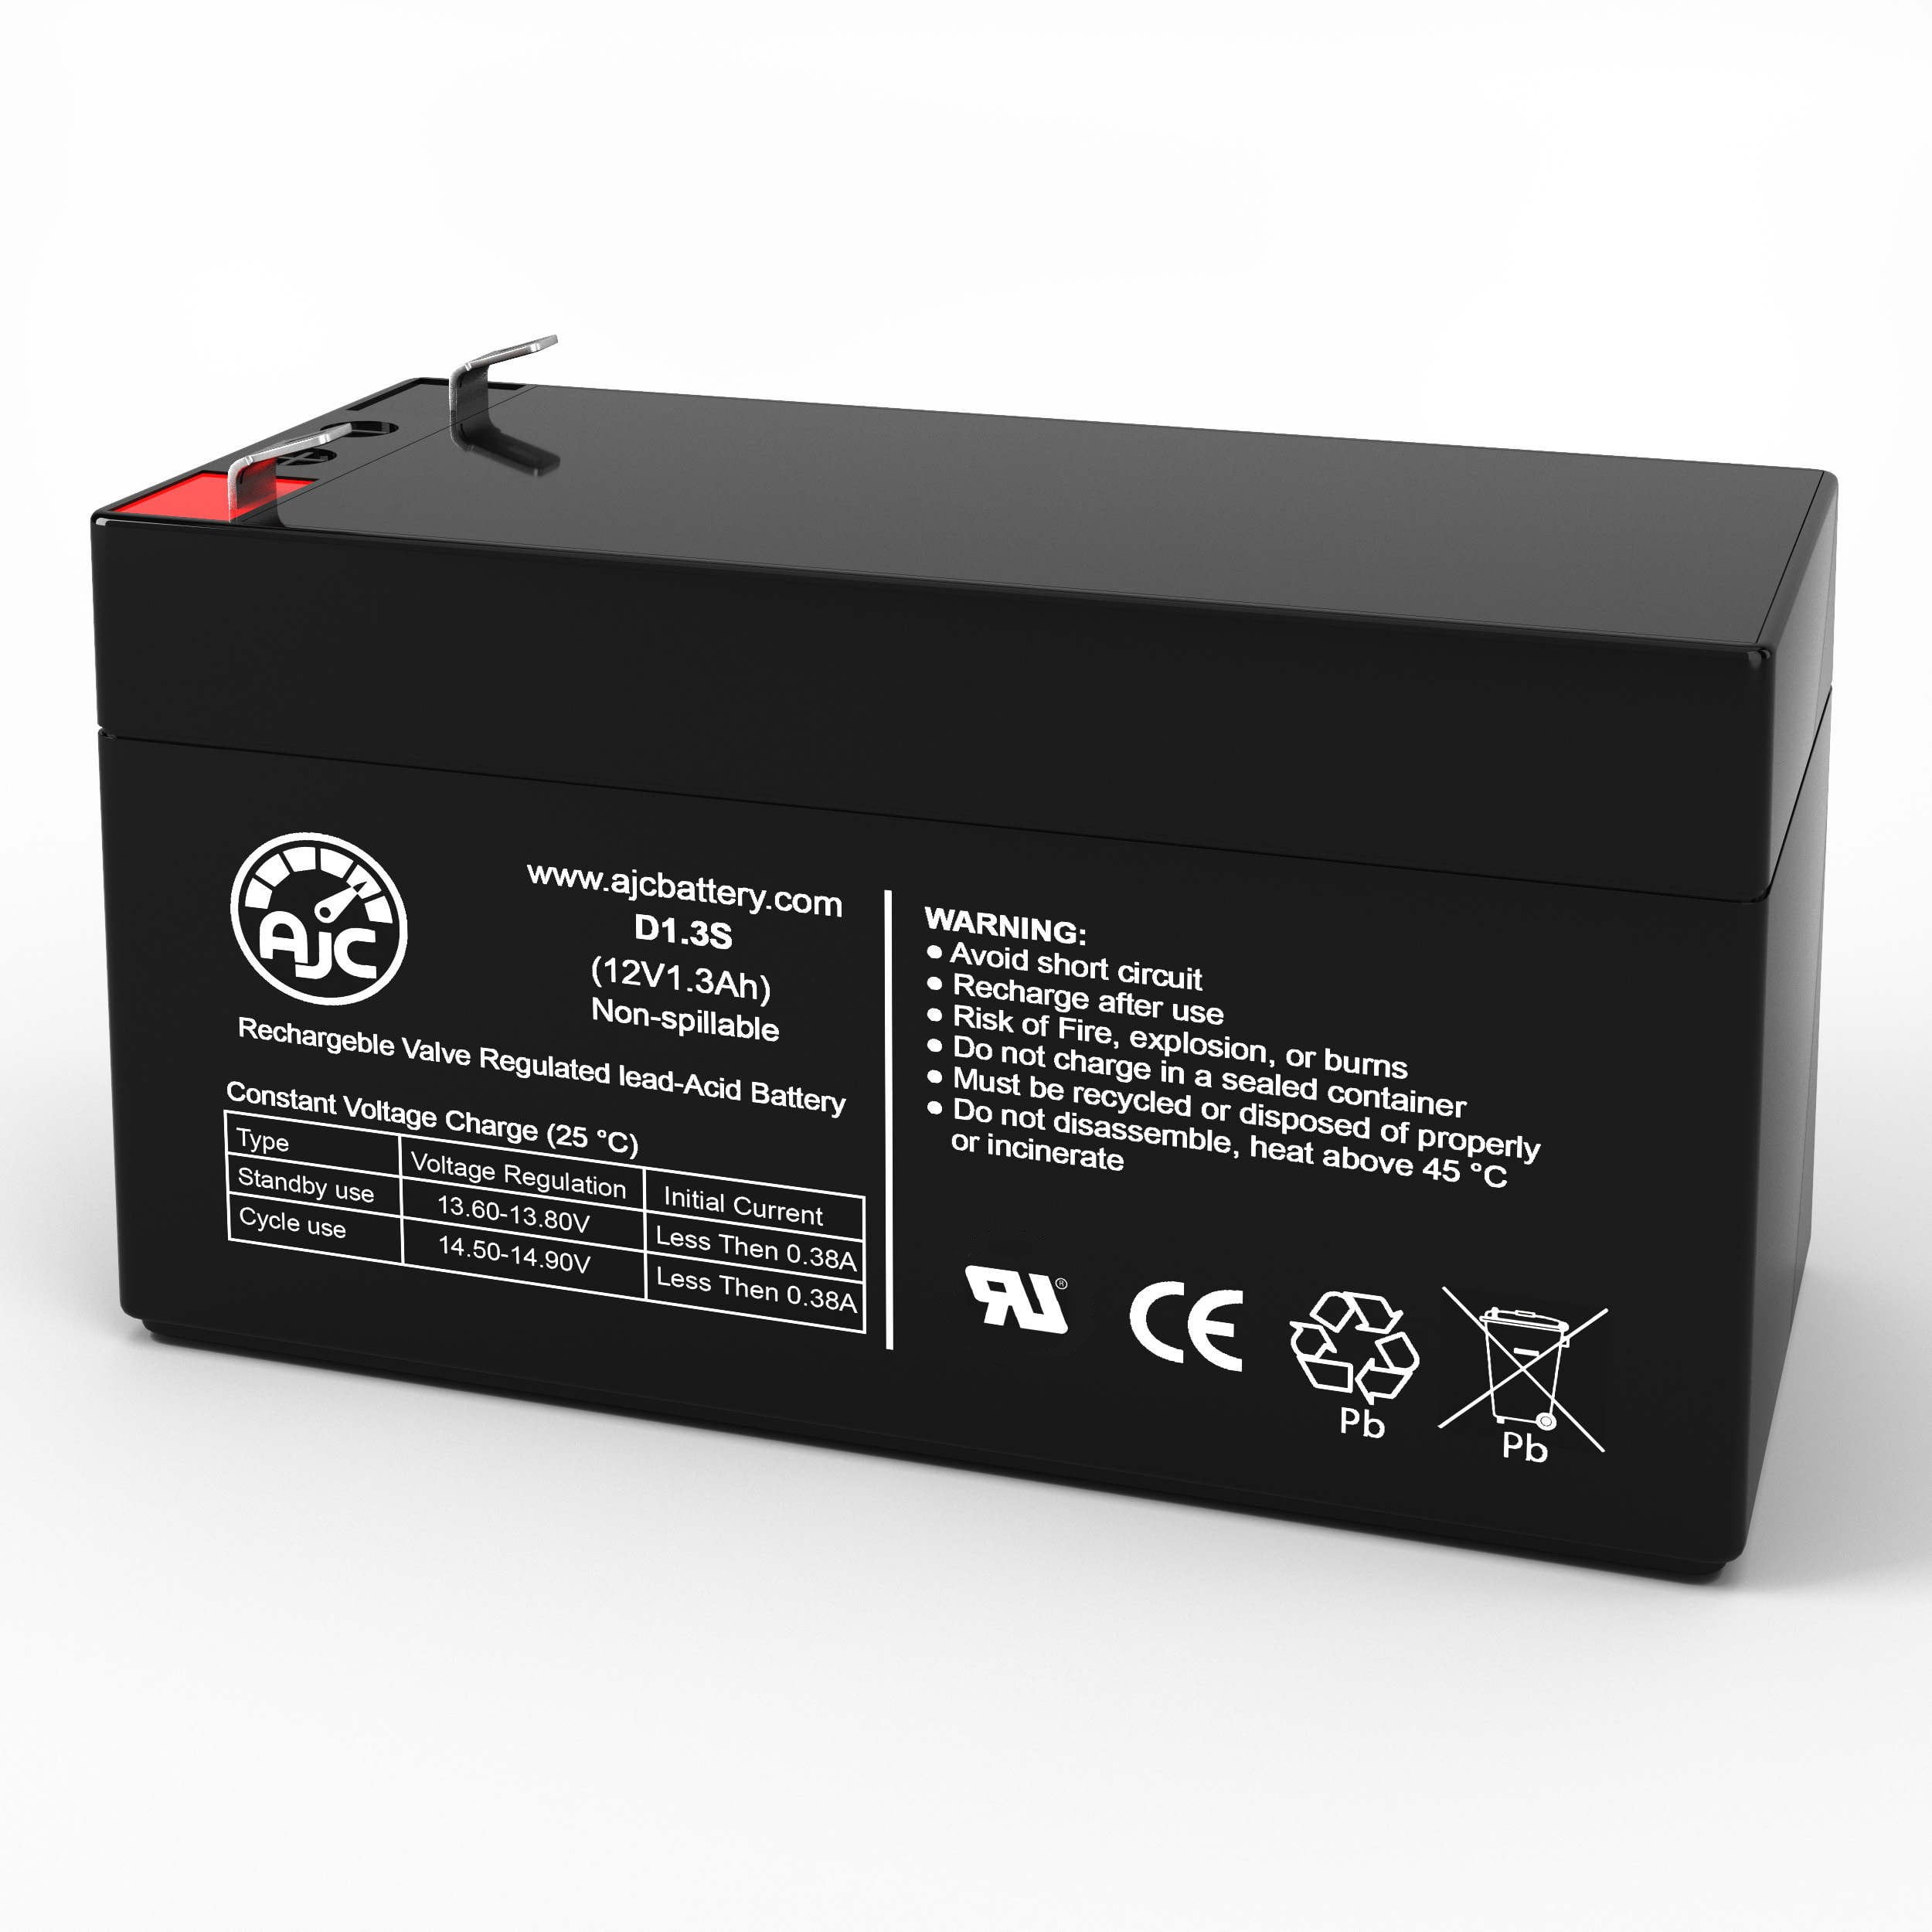 Napco GEMA1000E 12V 1.3Ah Alarm Battery This is an AJC Brand Replacement